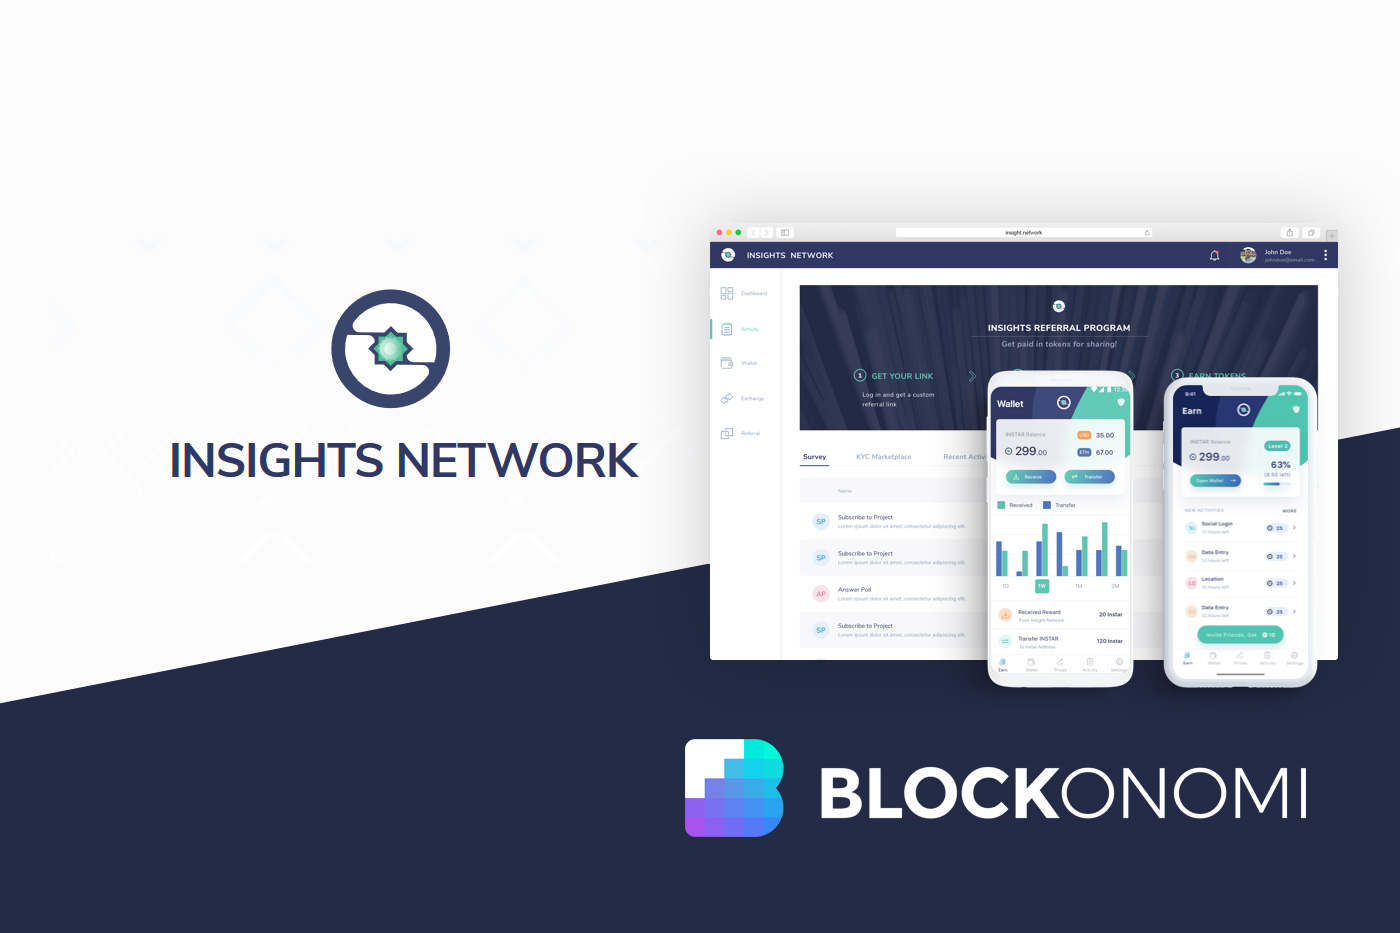 Insights Network